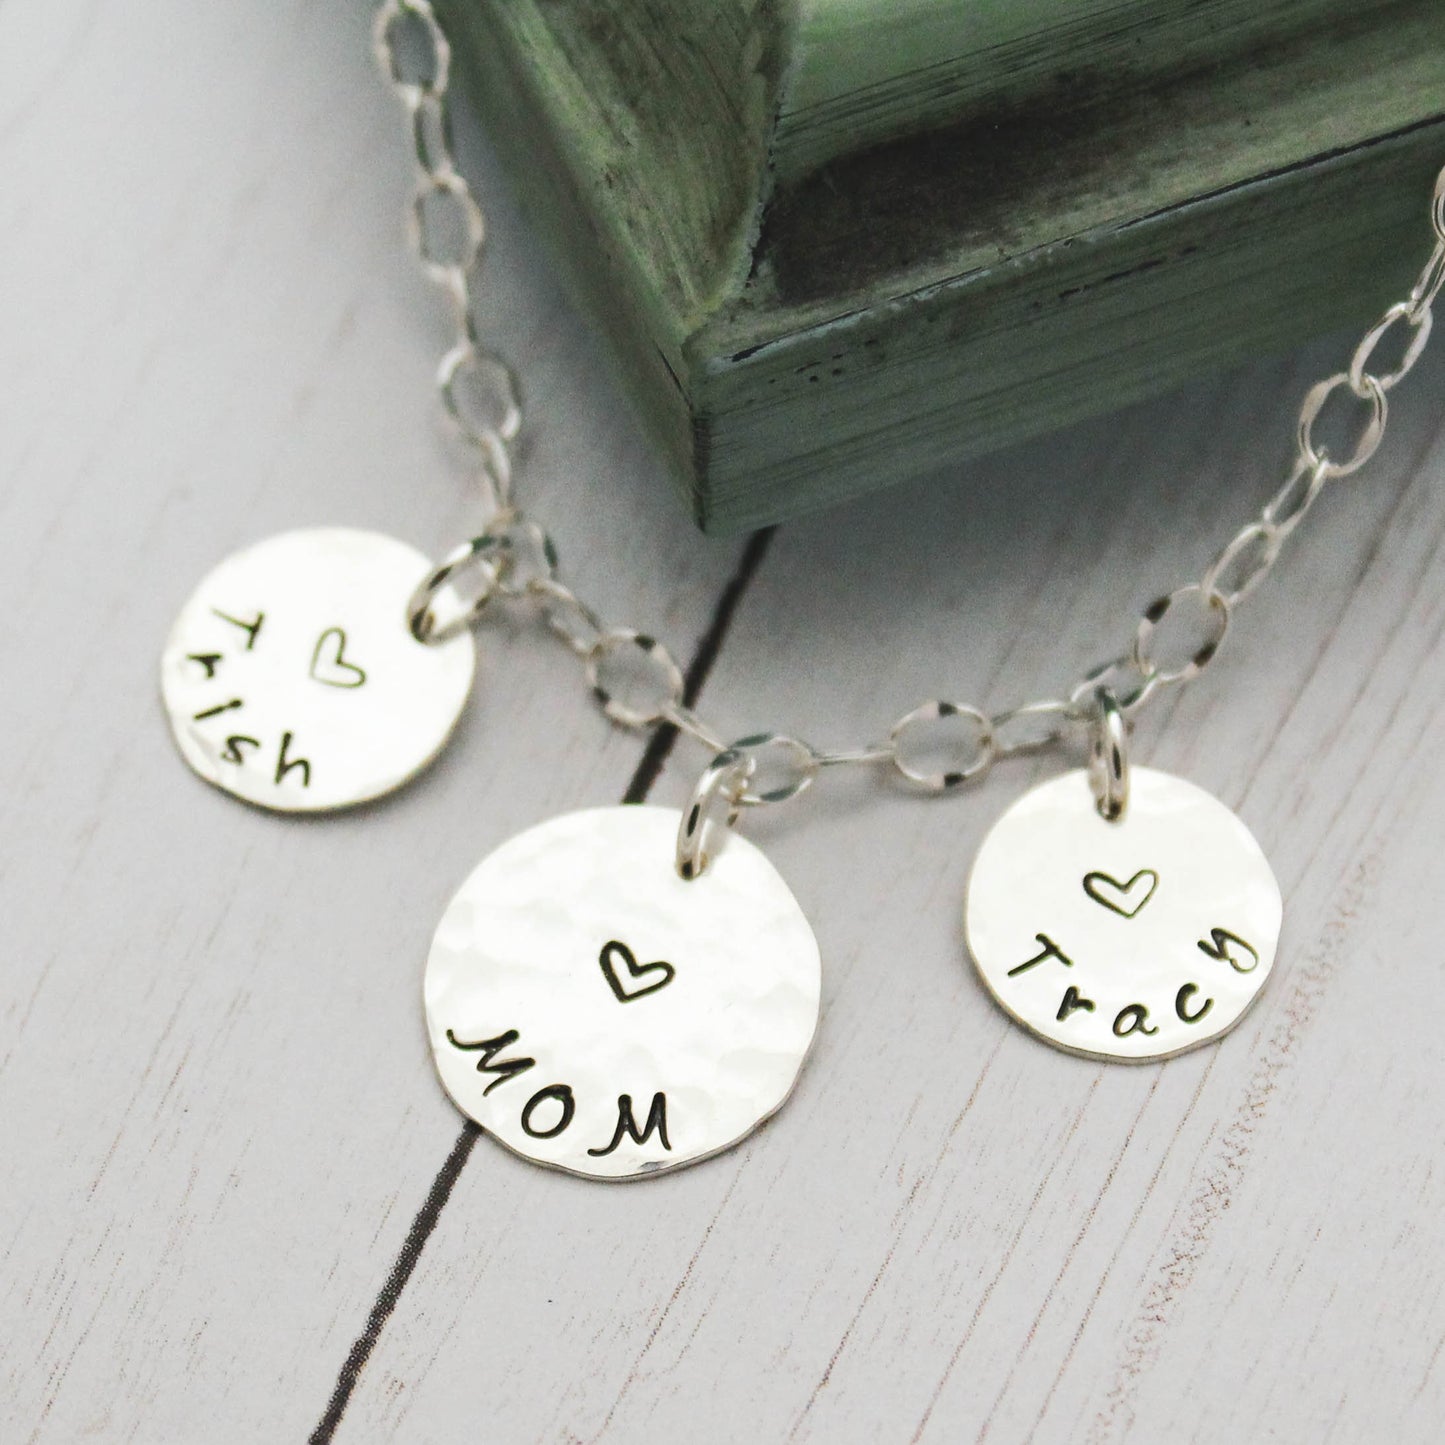 Personalized Mommy or Grandma Charm Bracelet, Sterling Silver Mother Charm Bracelet, Mother's Day Gift, Gifts for Her, Hand Stamped